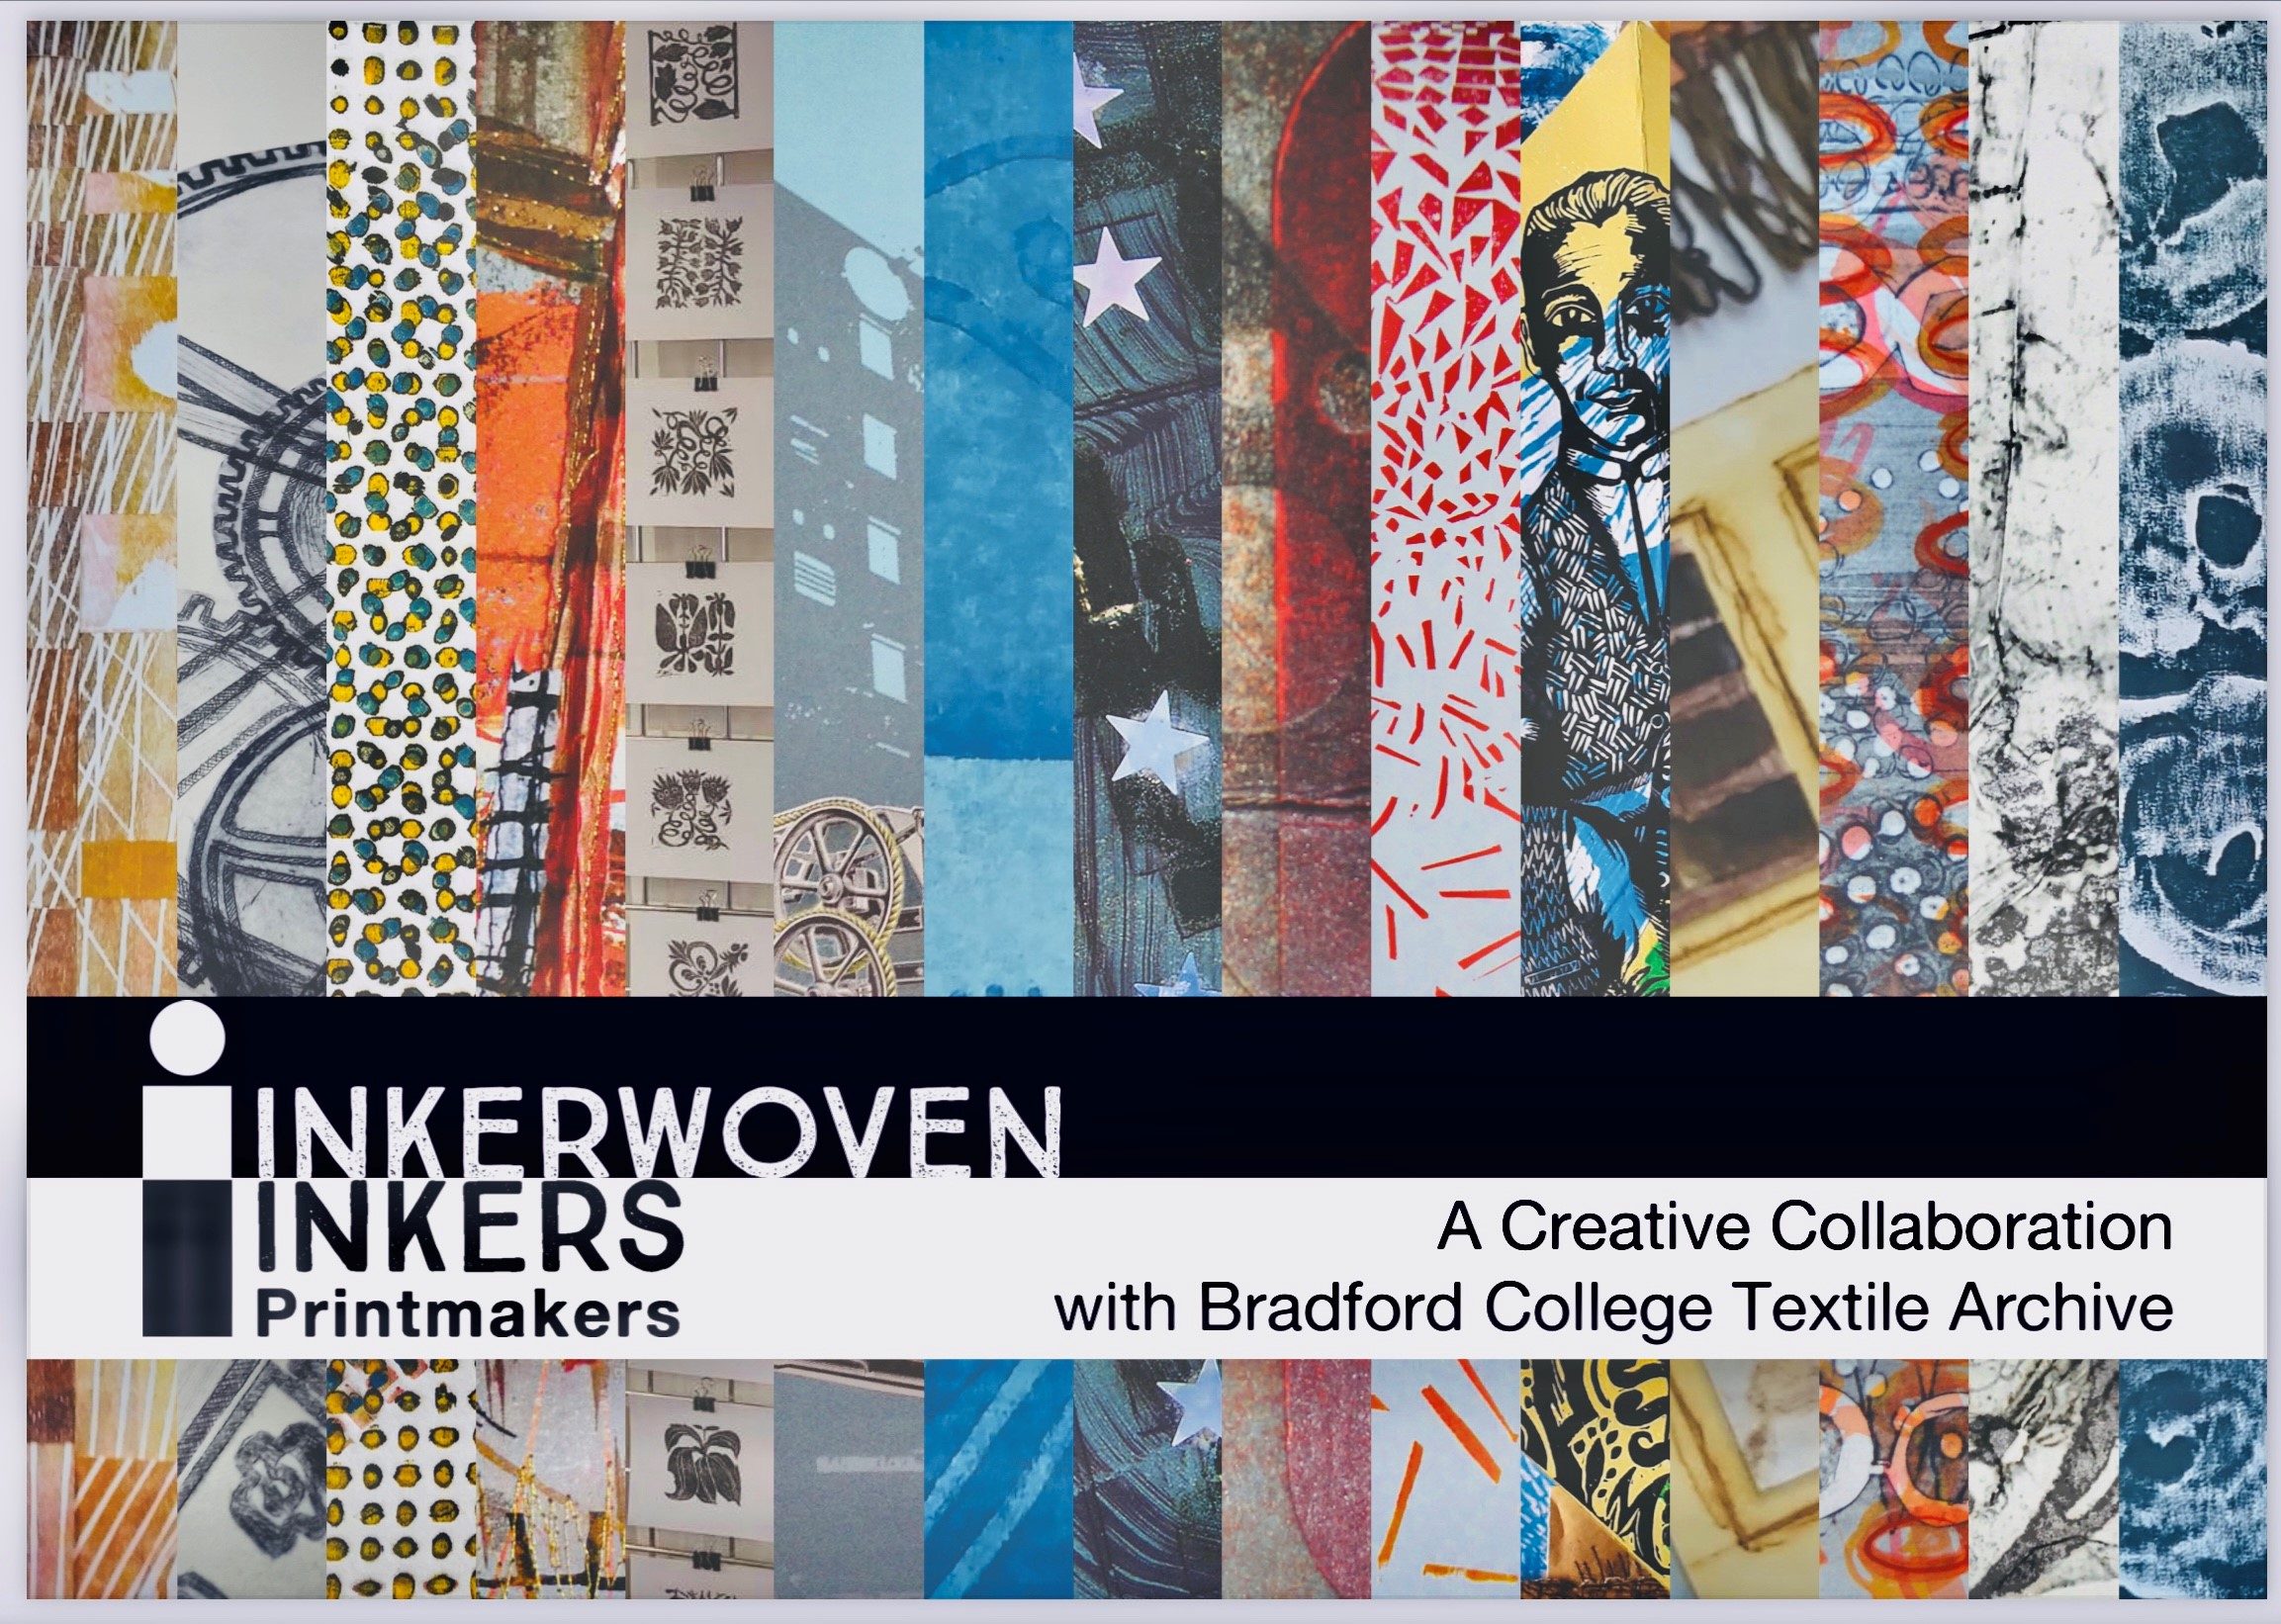 Launch of Inkerwoven – a celebration of Bradford’s rich textile heritage